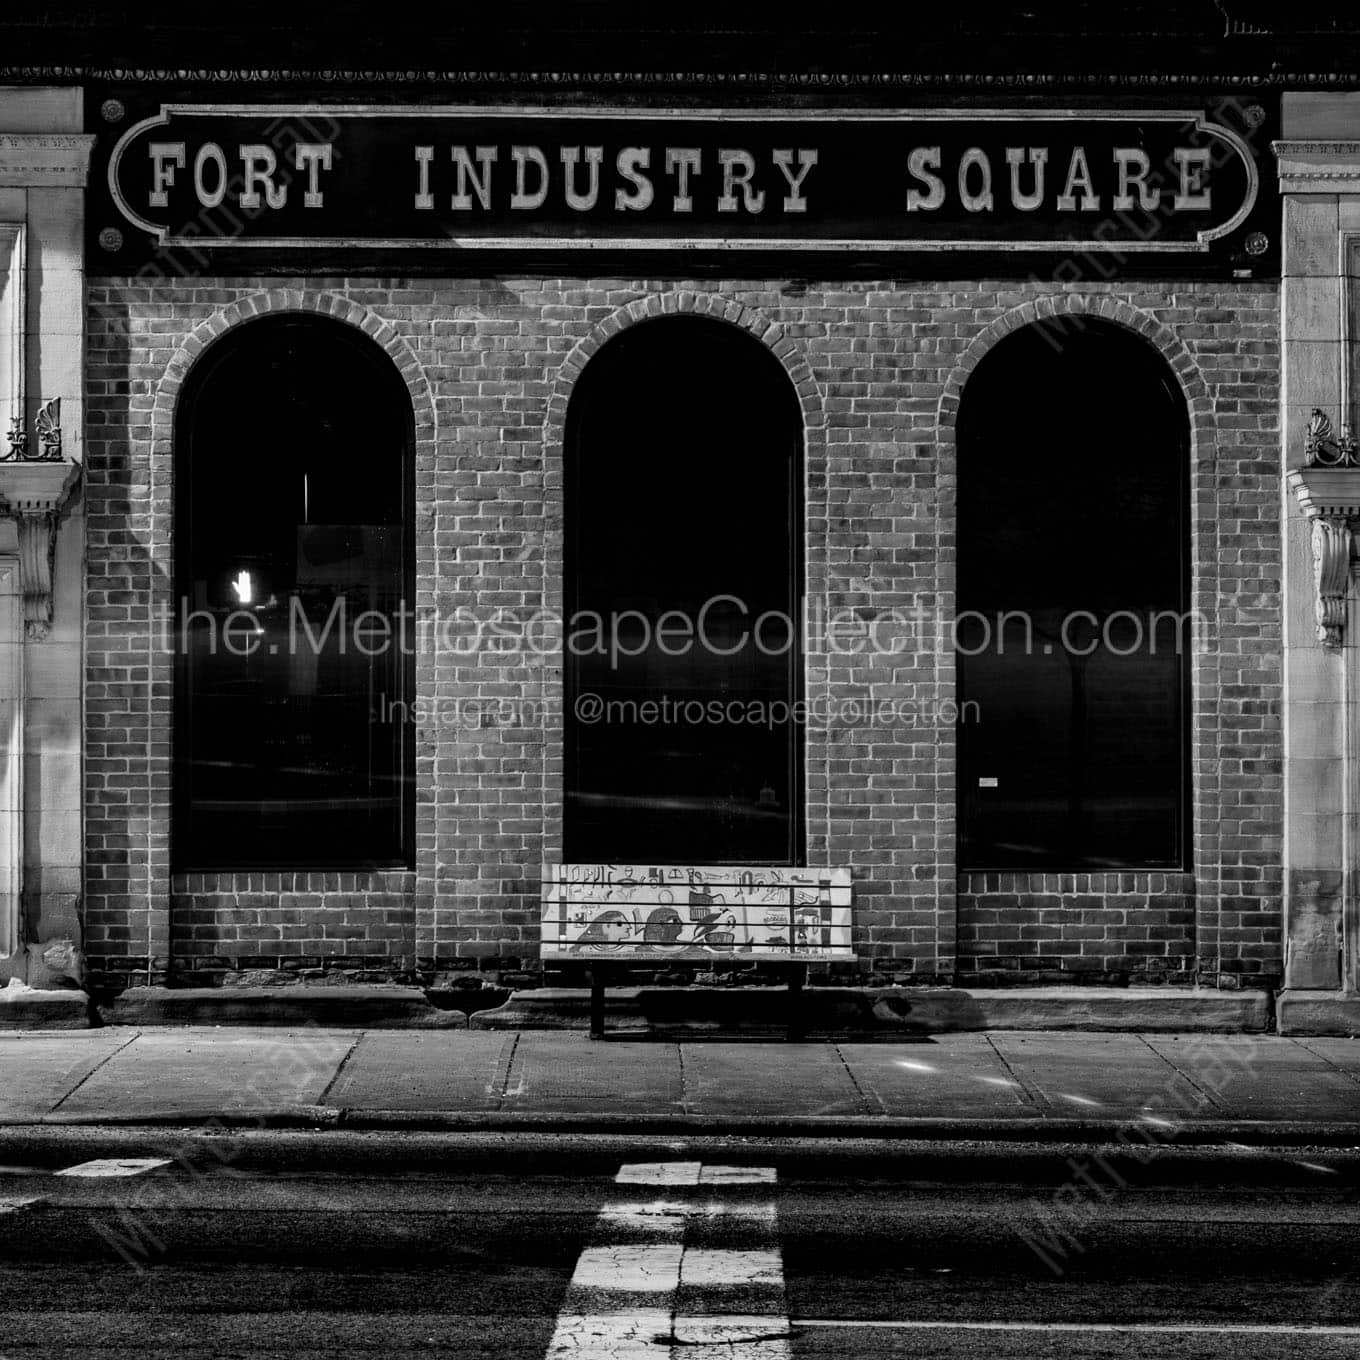 fort industry square at night Black & White Wall Art